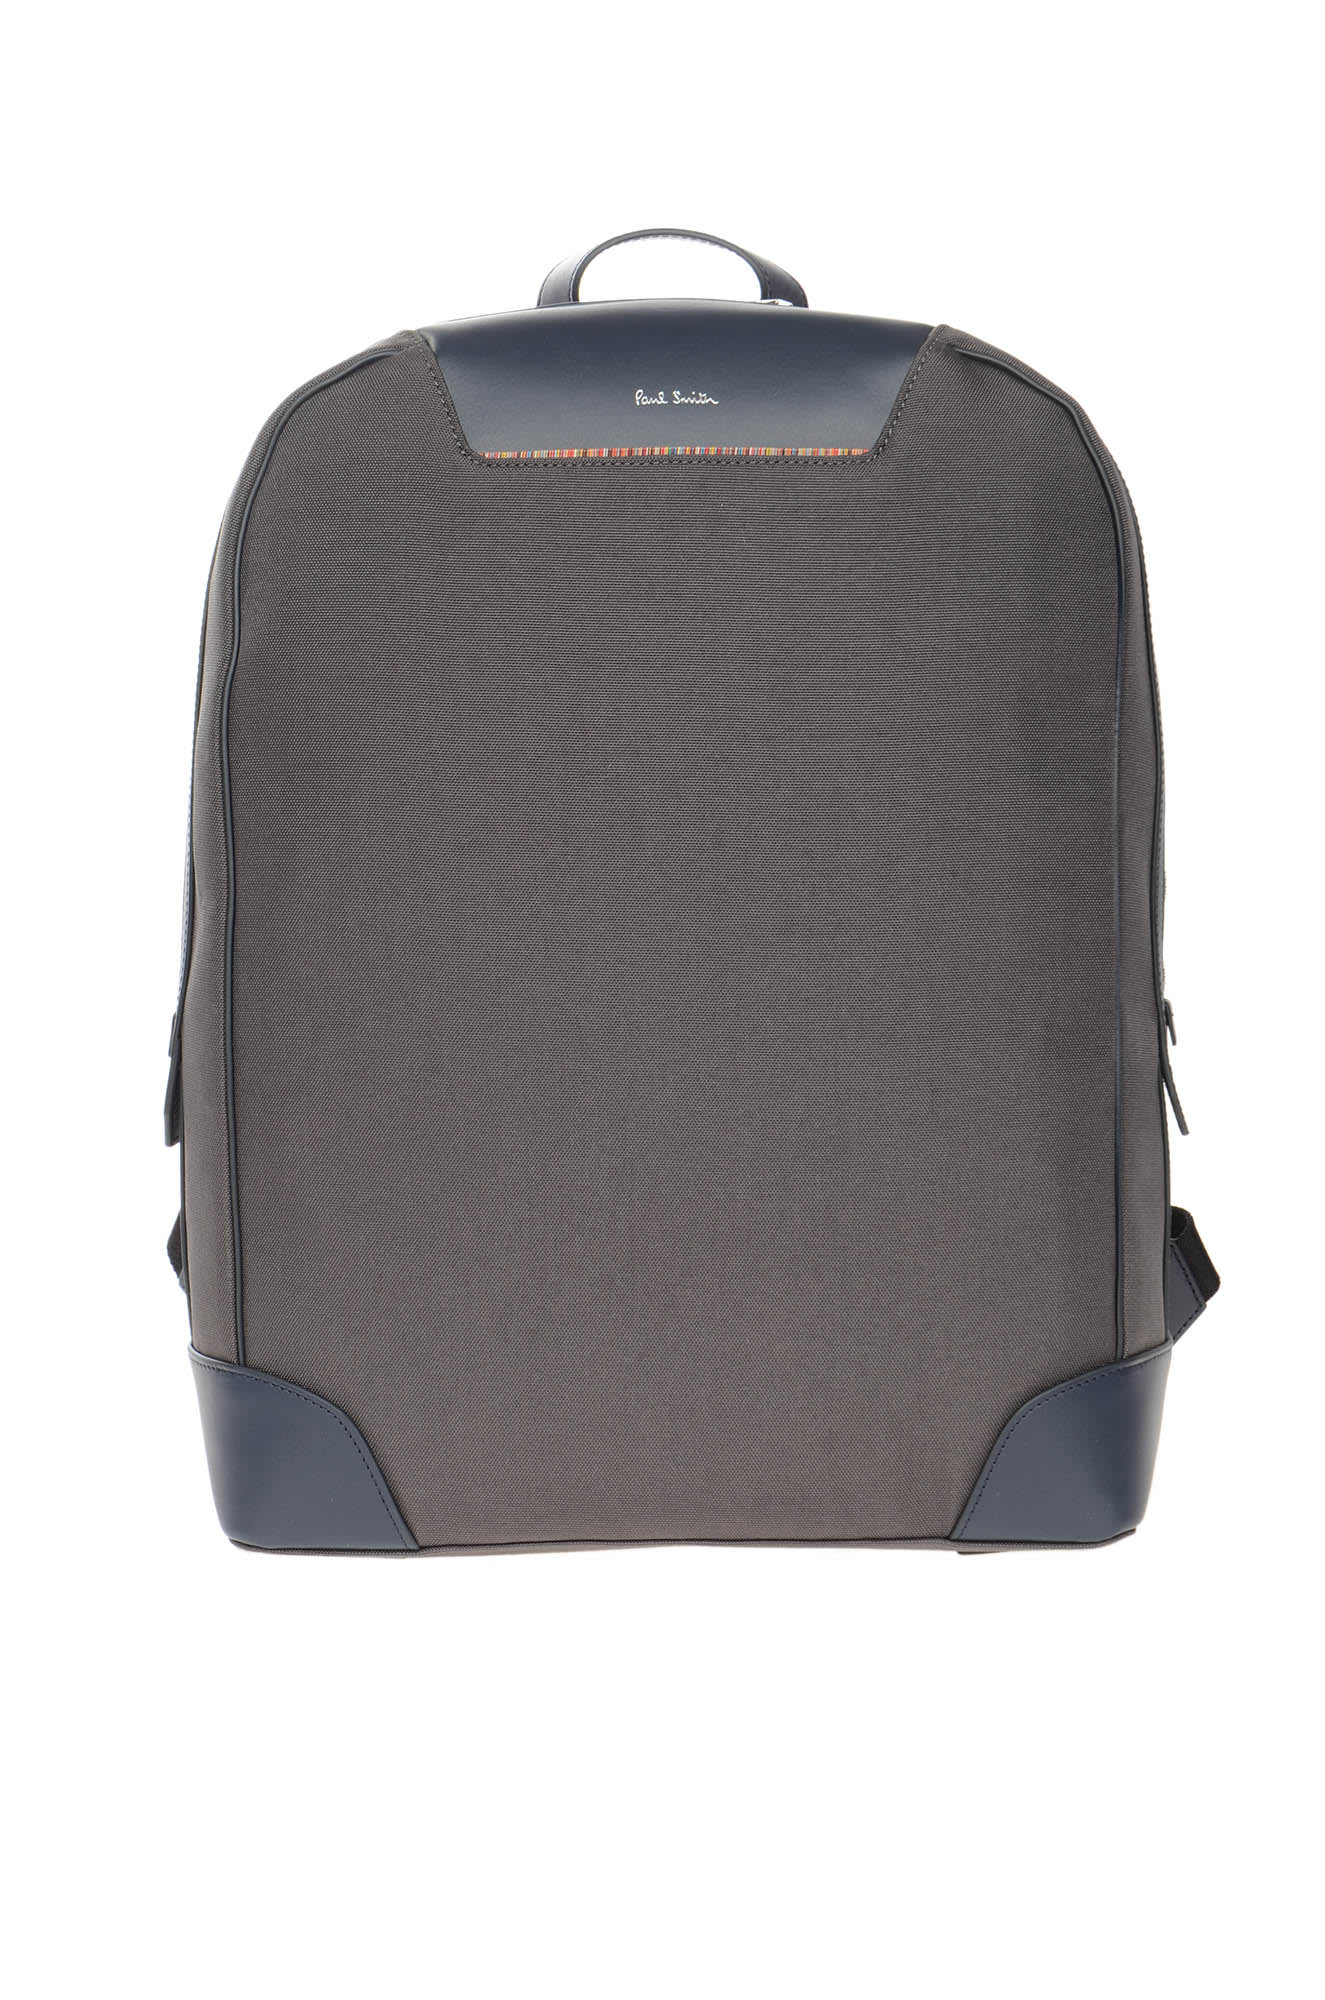 Paul Smith Travel Backpack